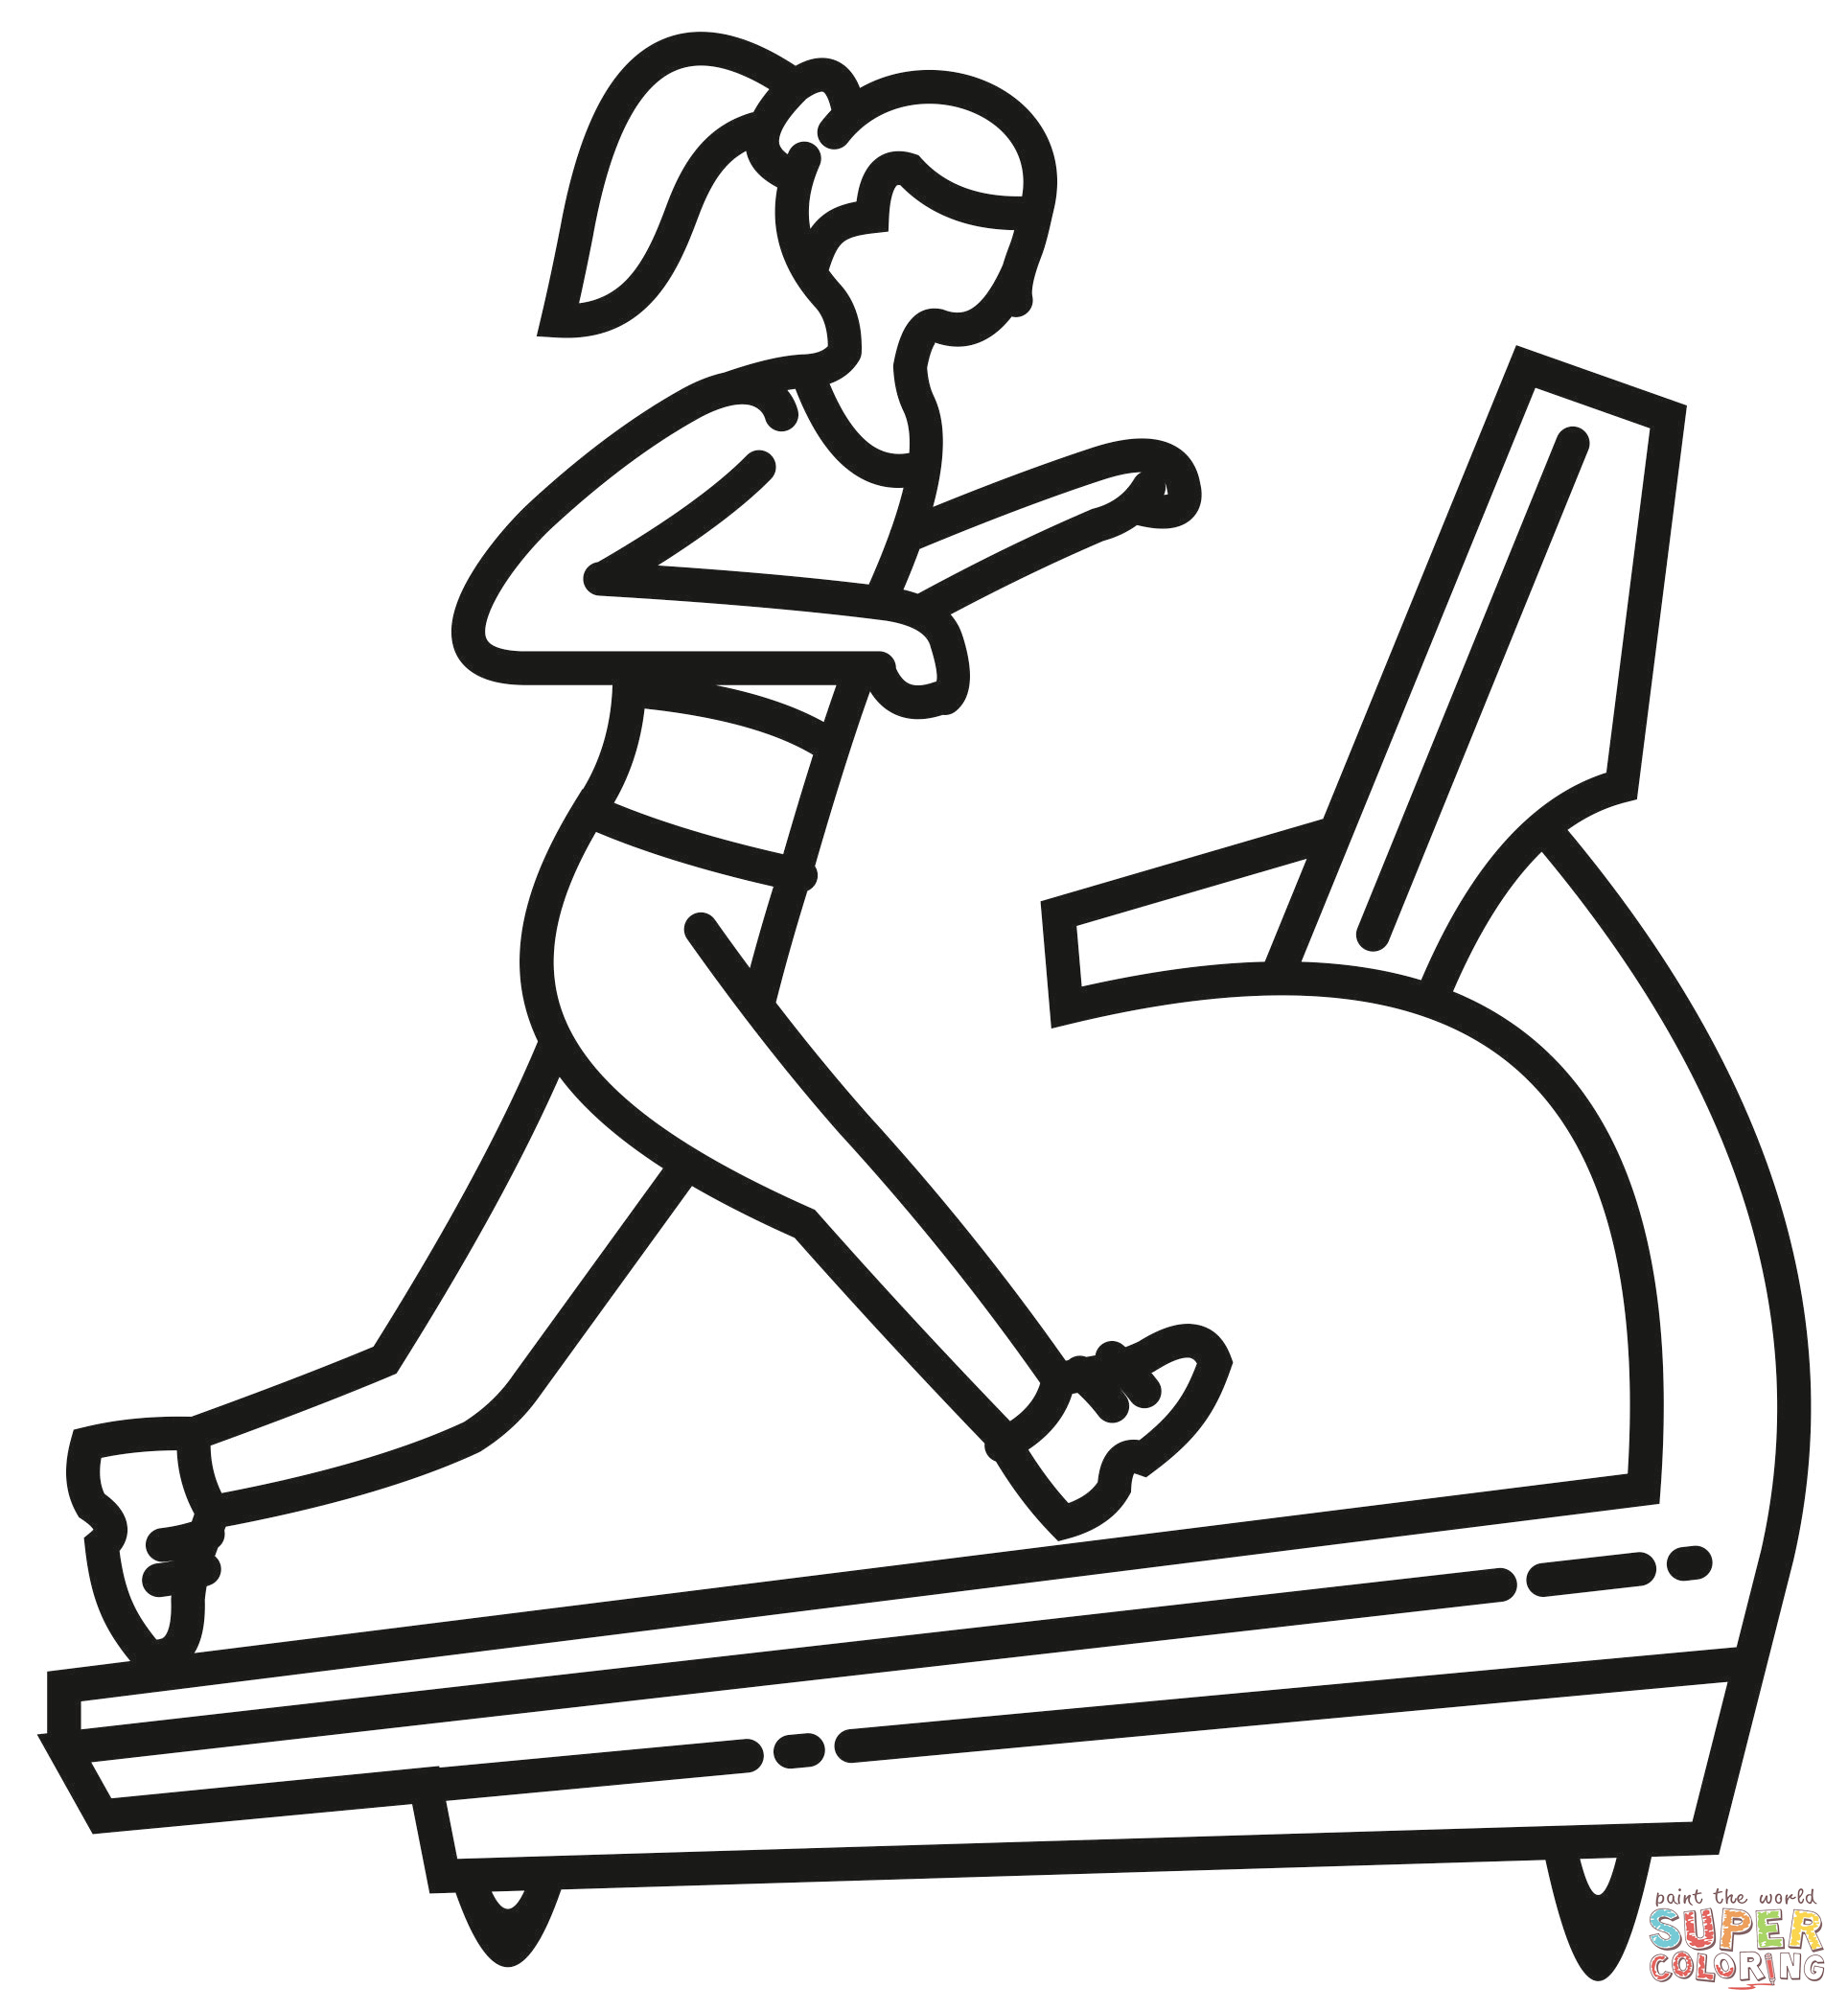 Treadmill coloring page free printable coloring pages